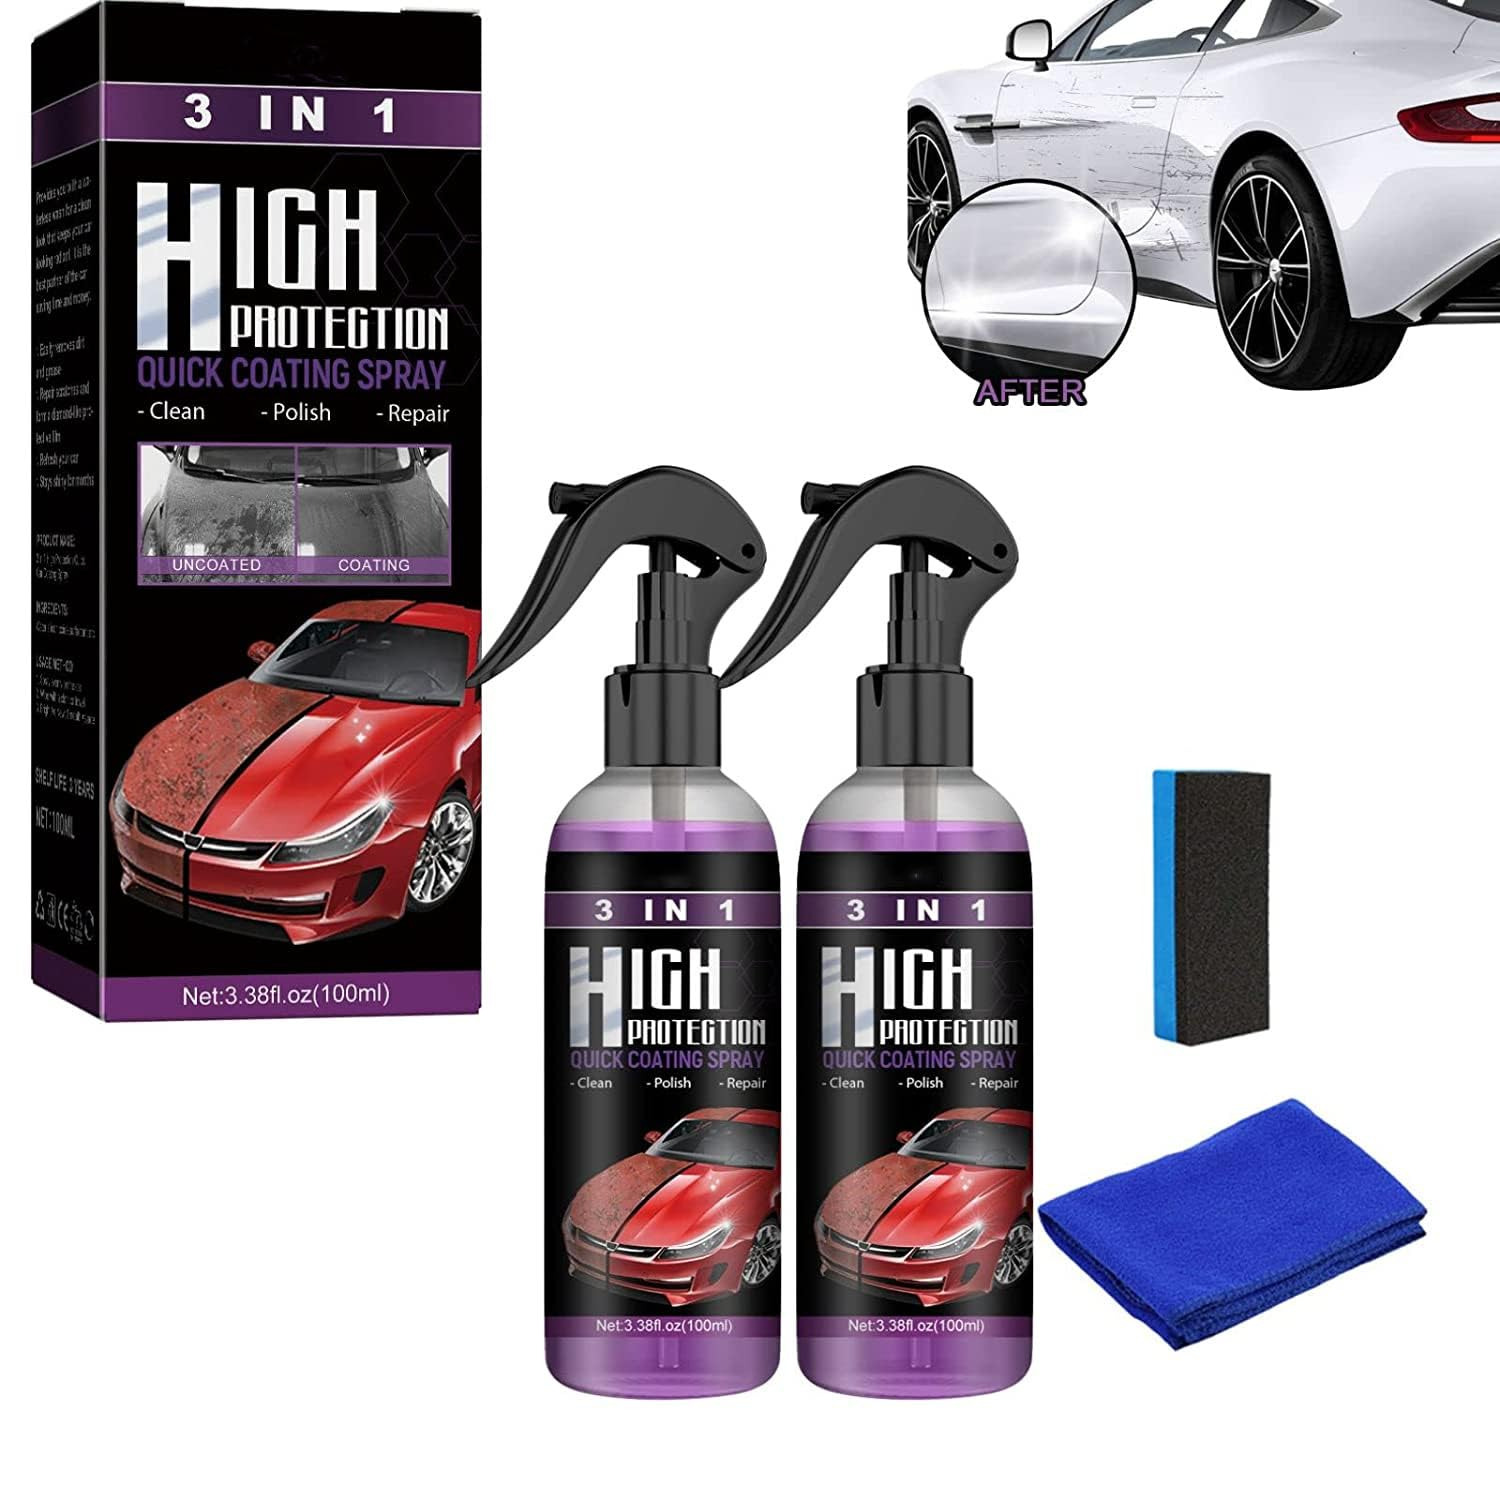 2PCS 3 in 1 High Protection Quick Coating Spray, Fast Fine Scratch Repair, Fast 